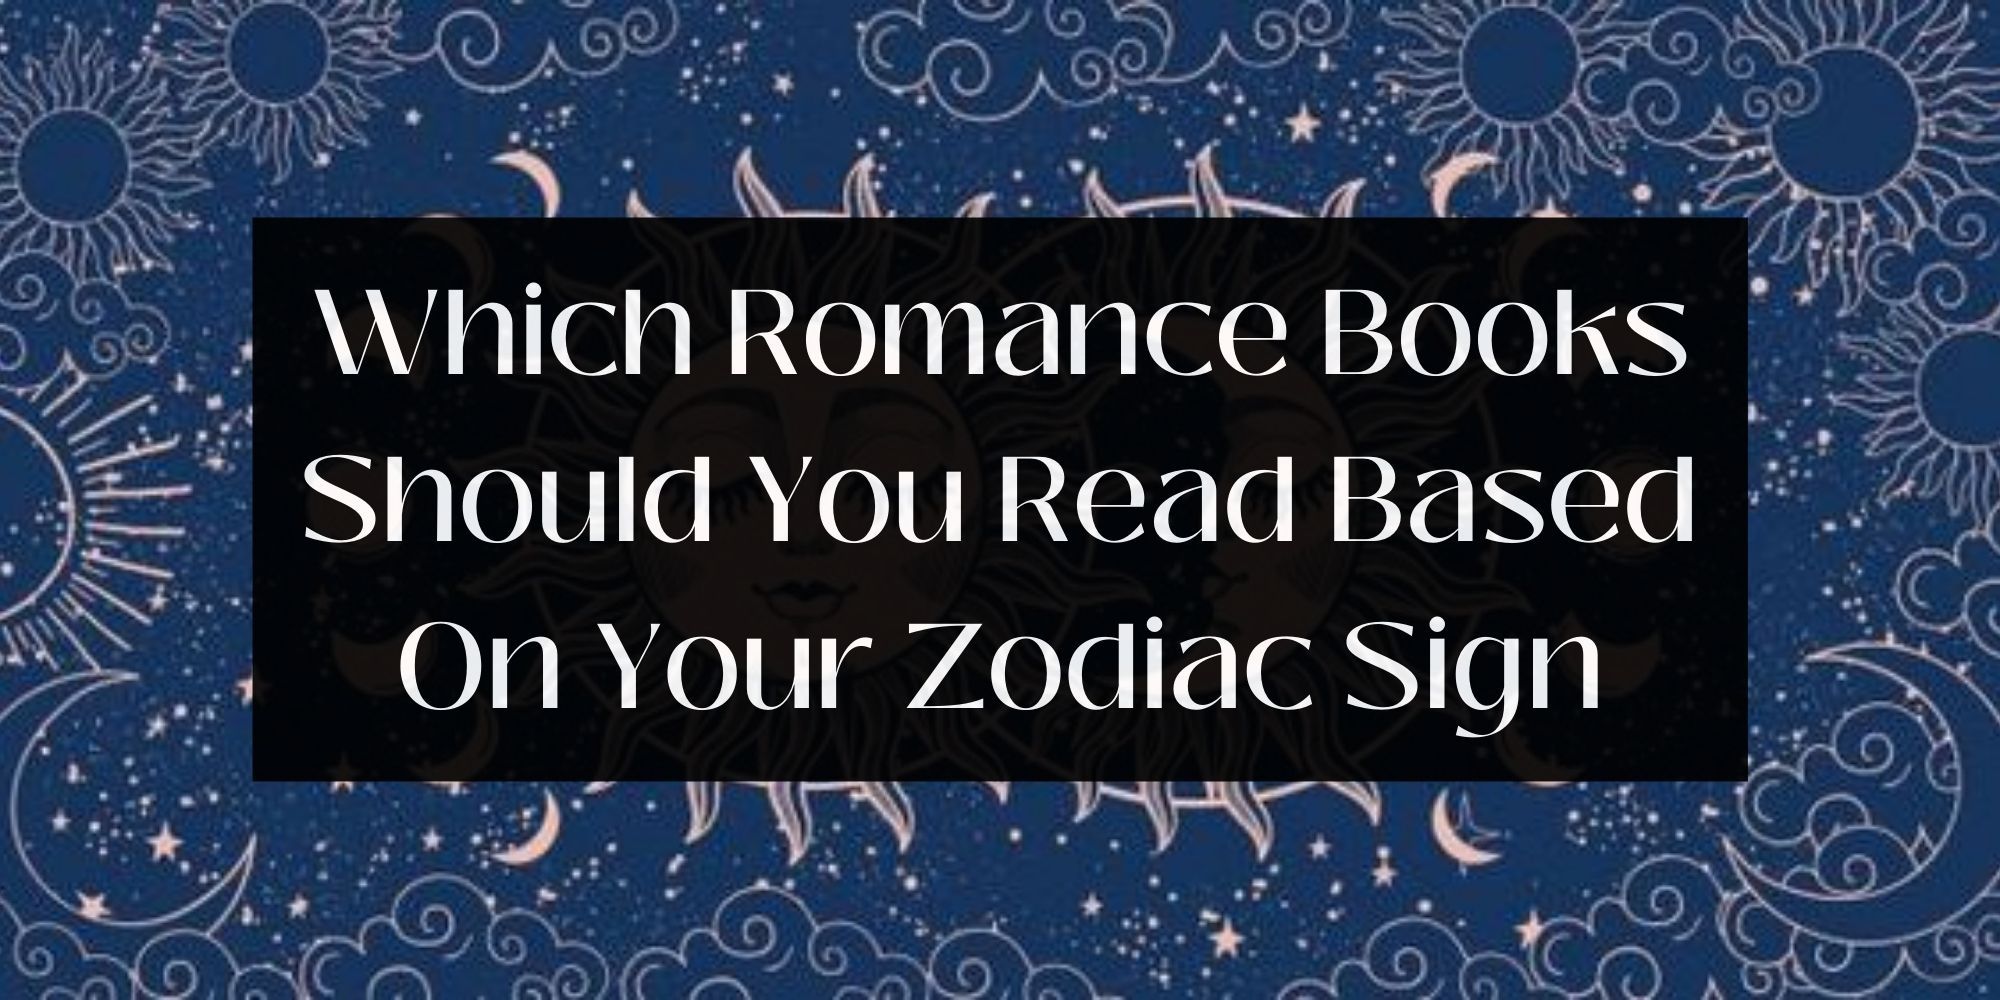 Which Romance Books Should You Read Based On Your Zodiac Sign